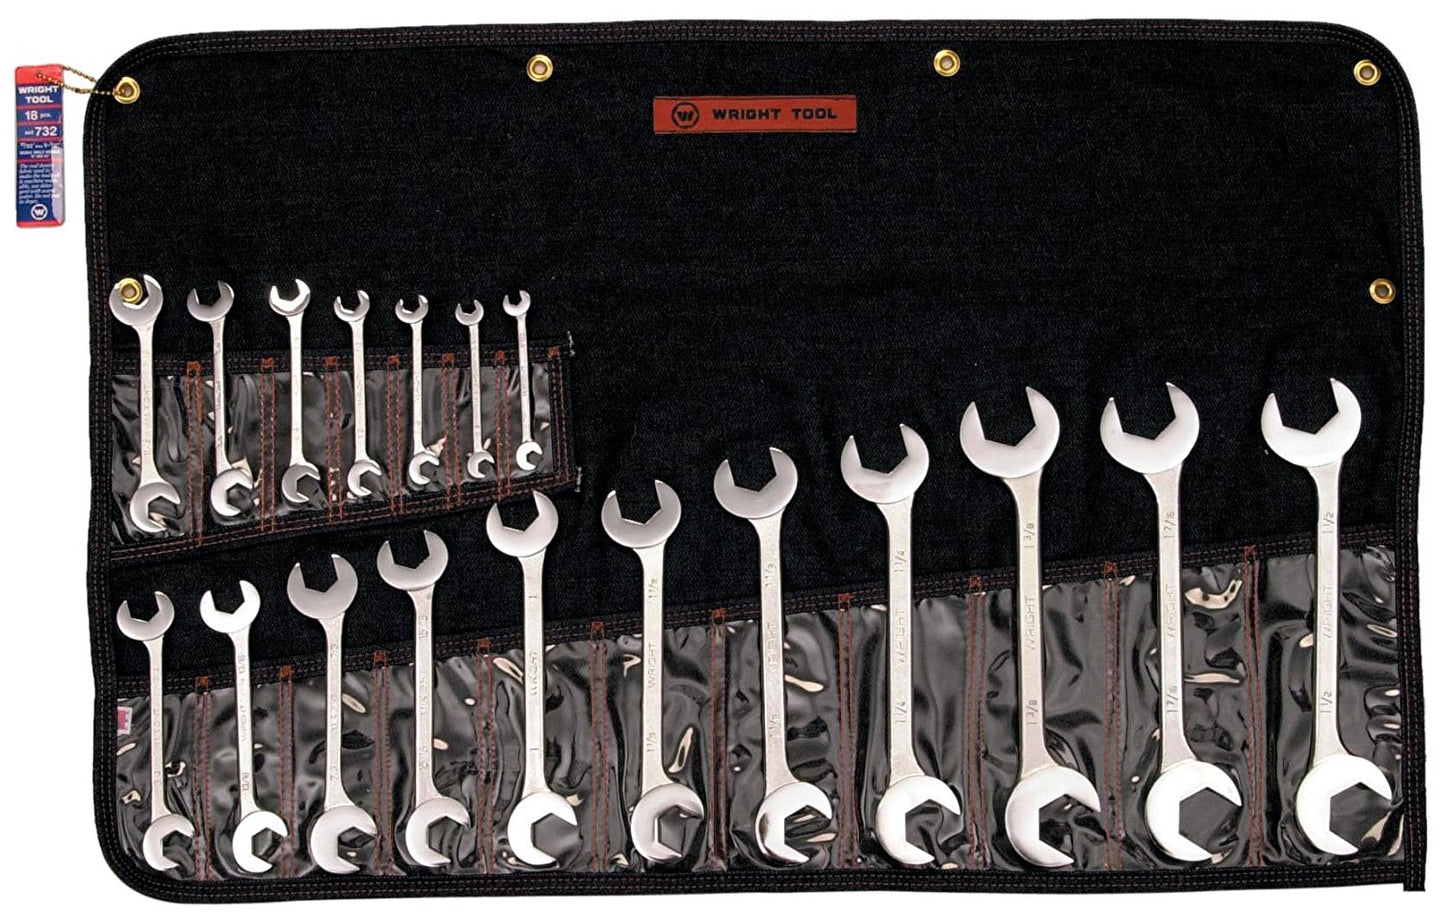 18 Piece Open End Double Angle 15 & 60 Degrees Wrench Set (732WR)